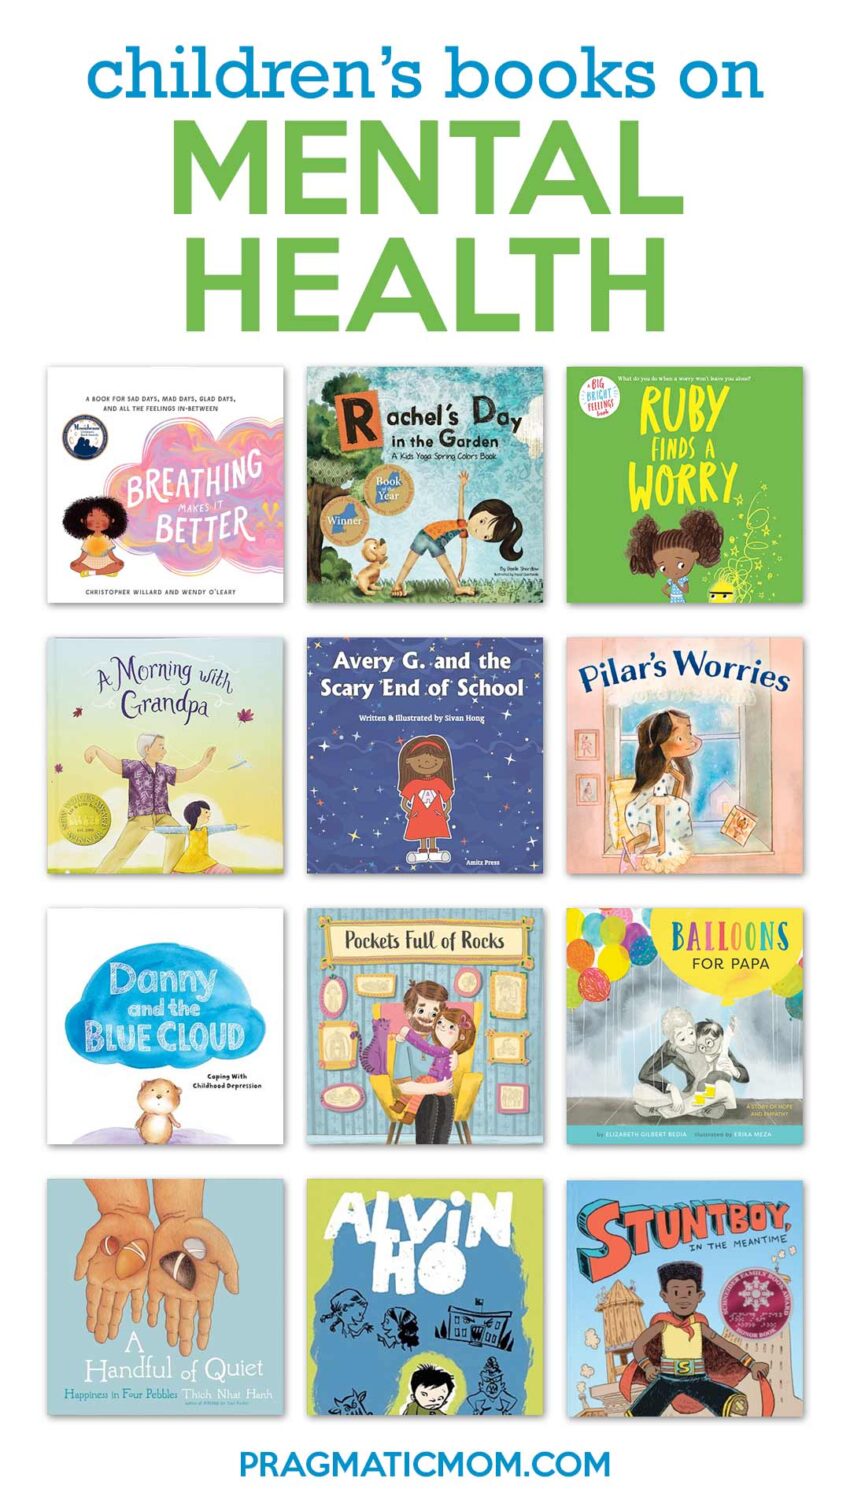 Children's Books on Mental Health Support During Stressful Times